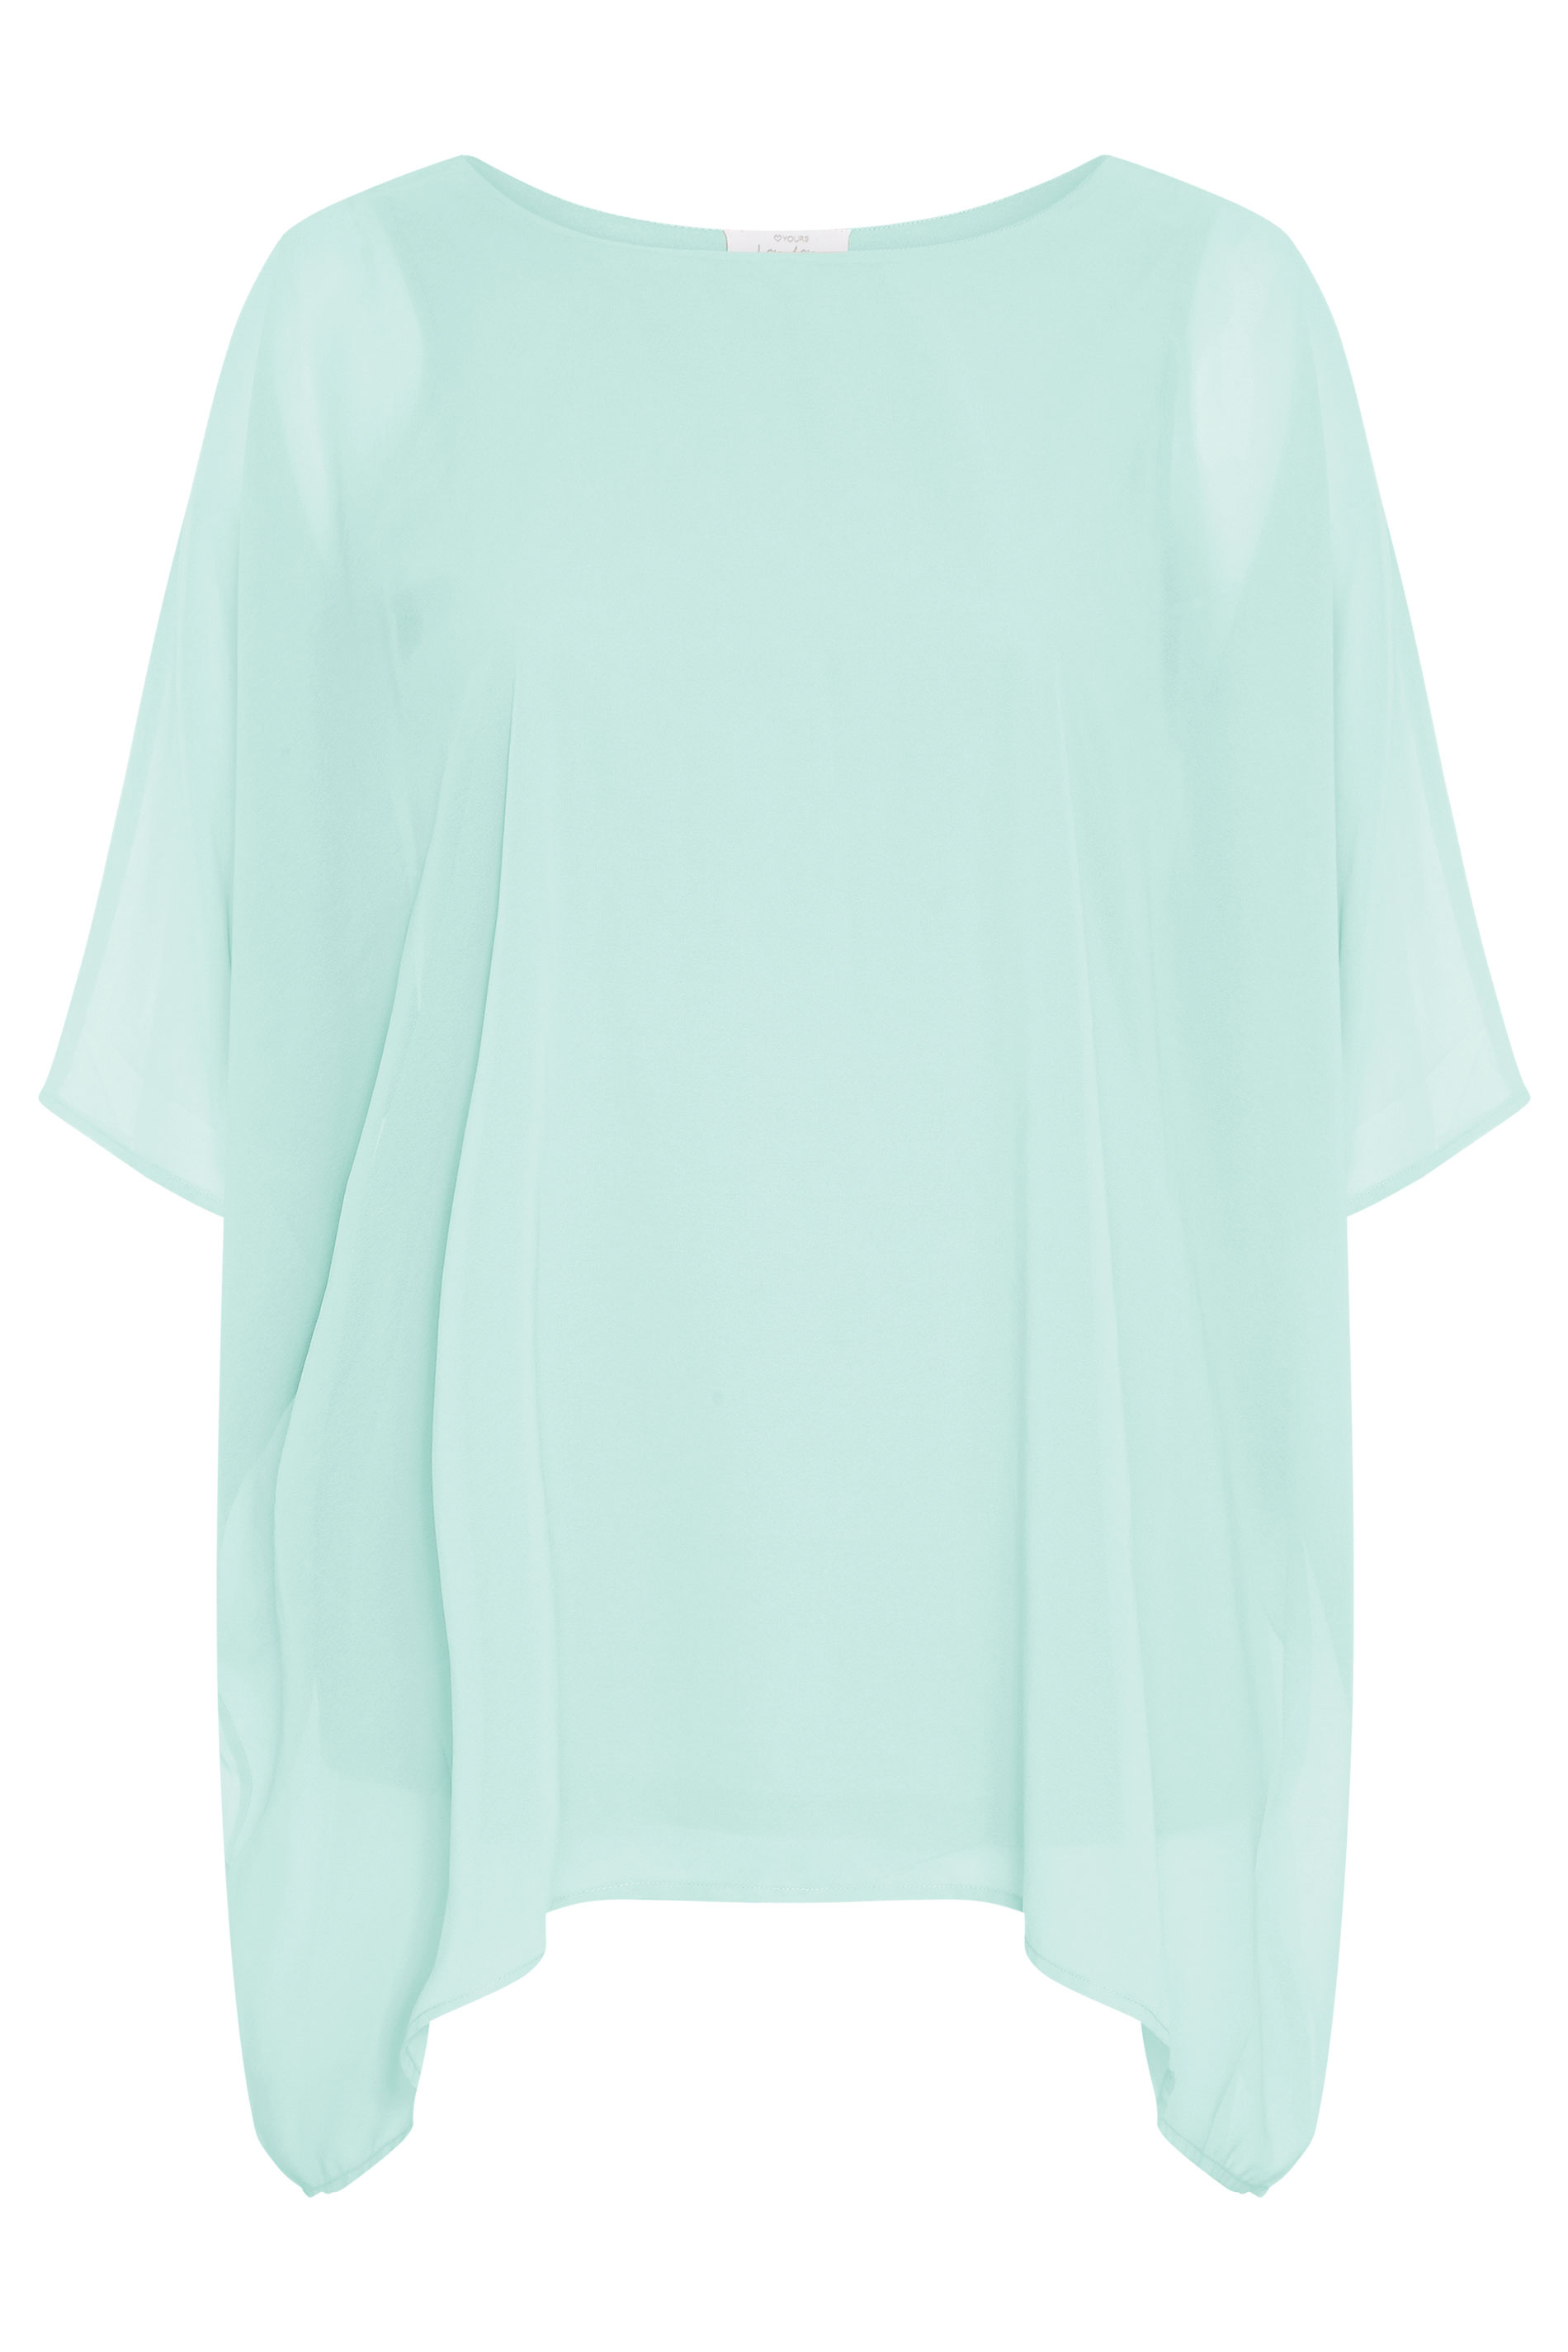 YOURS LONDON Mint Green Chiffon Cape Top | Yours Clothing